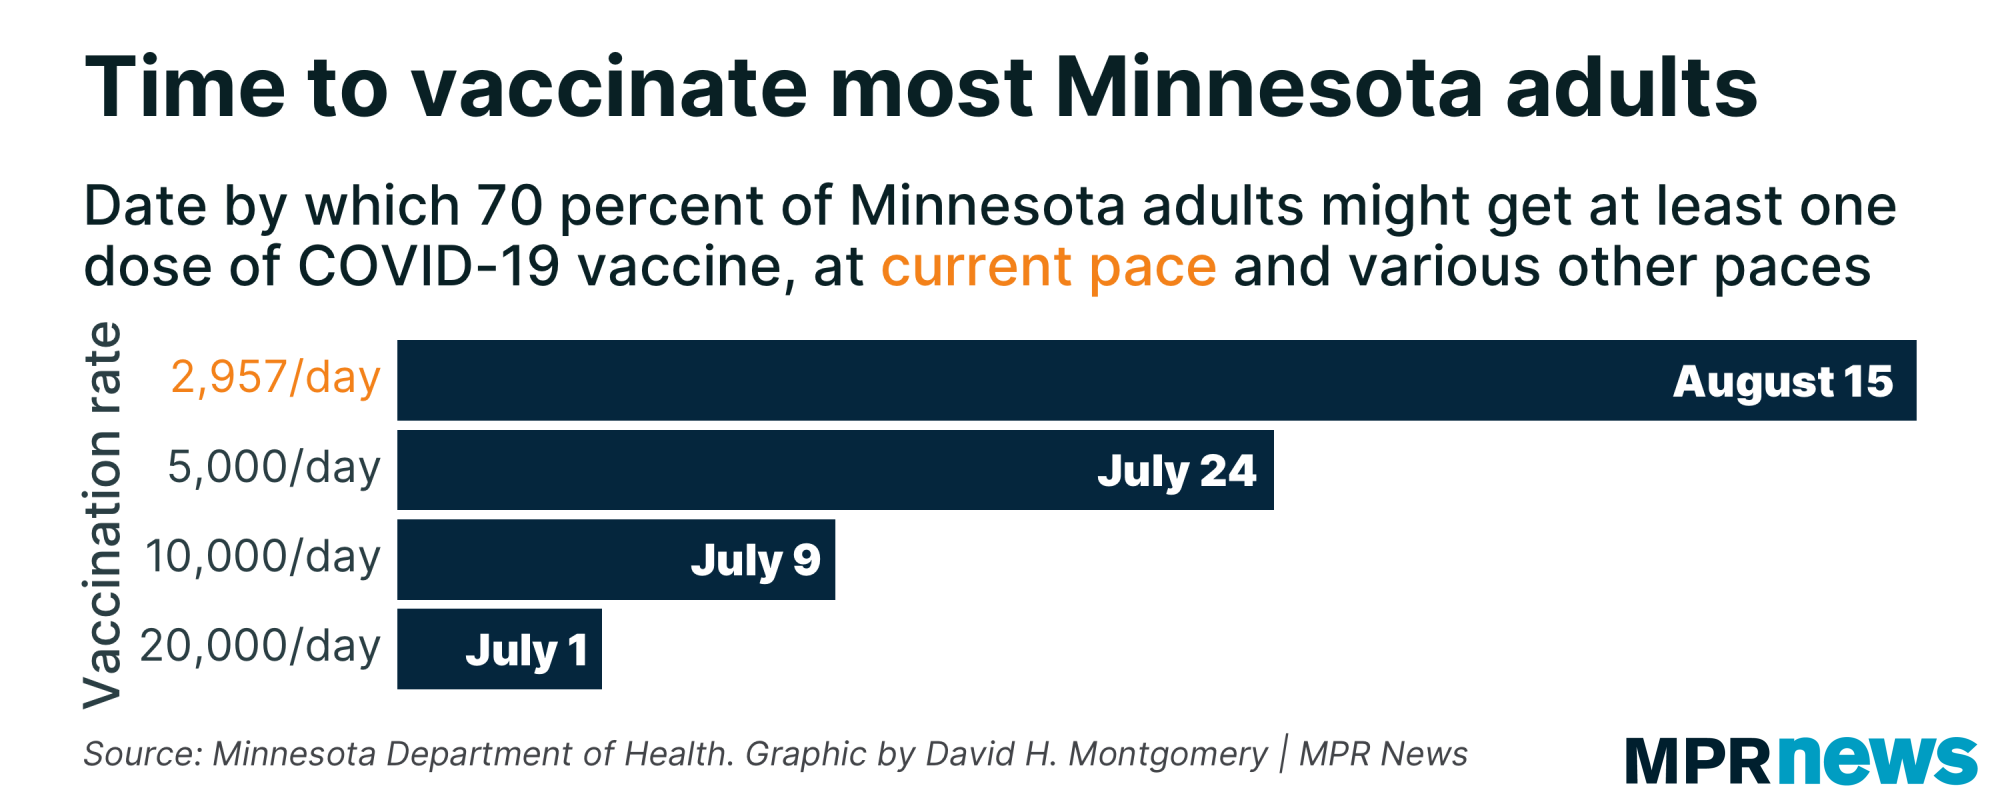 Graph of the time to vaccinate 70% of Minnesota adults at various paces